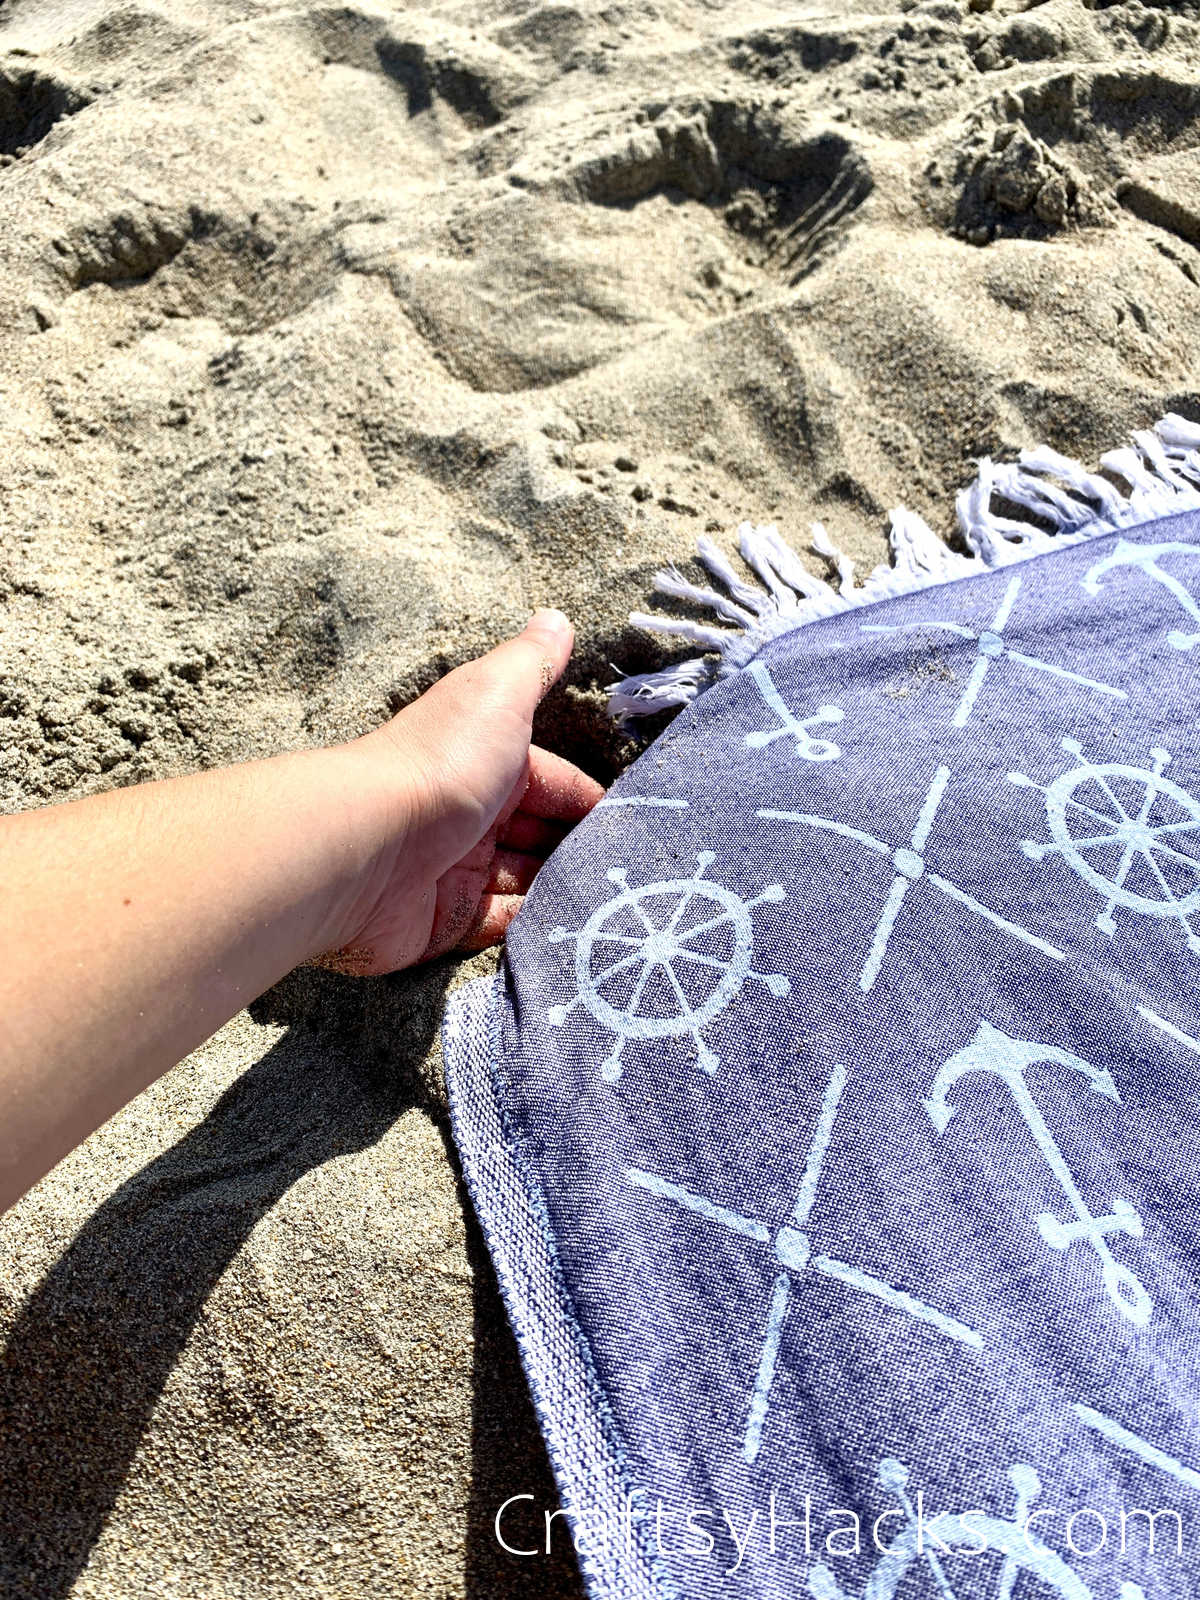 wrap corners of a towel in sand